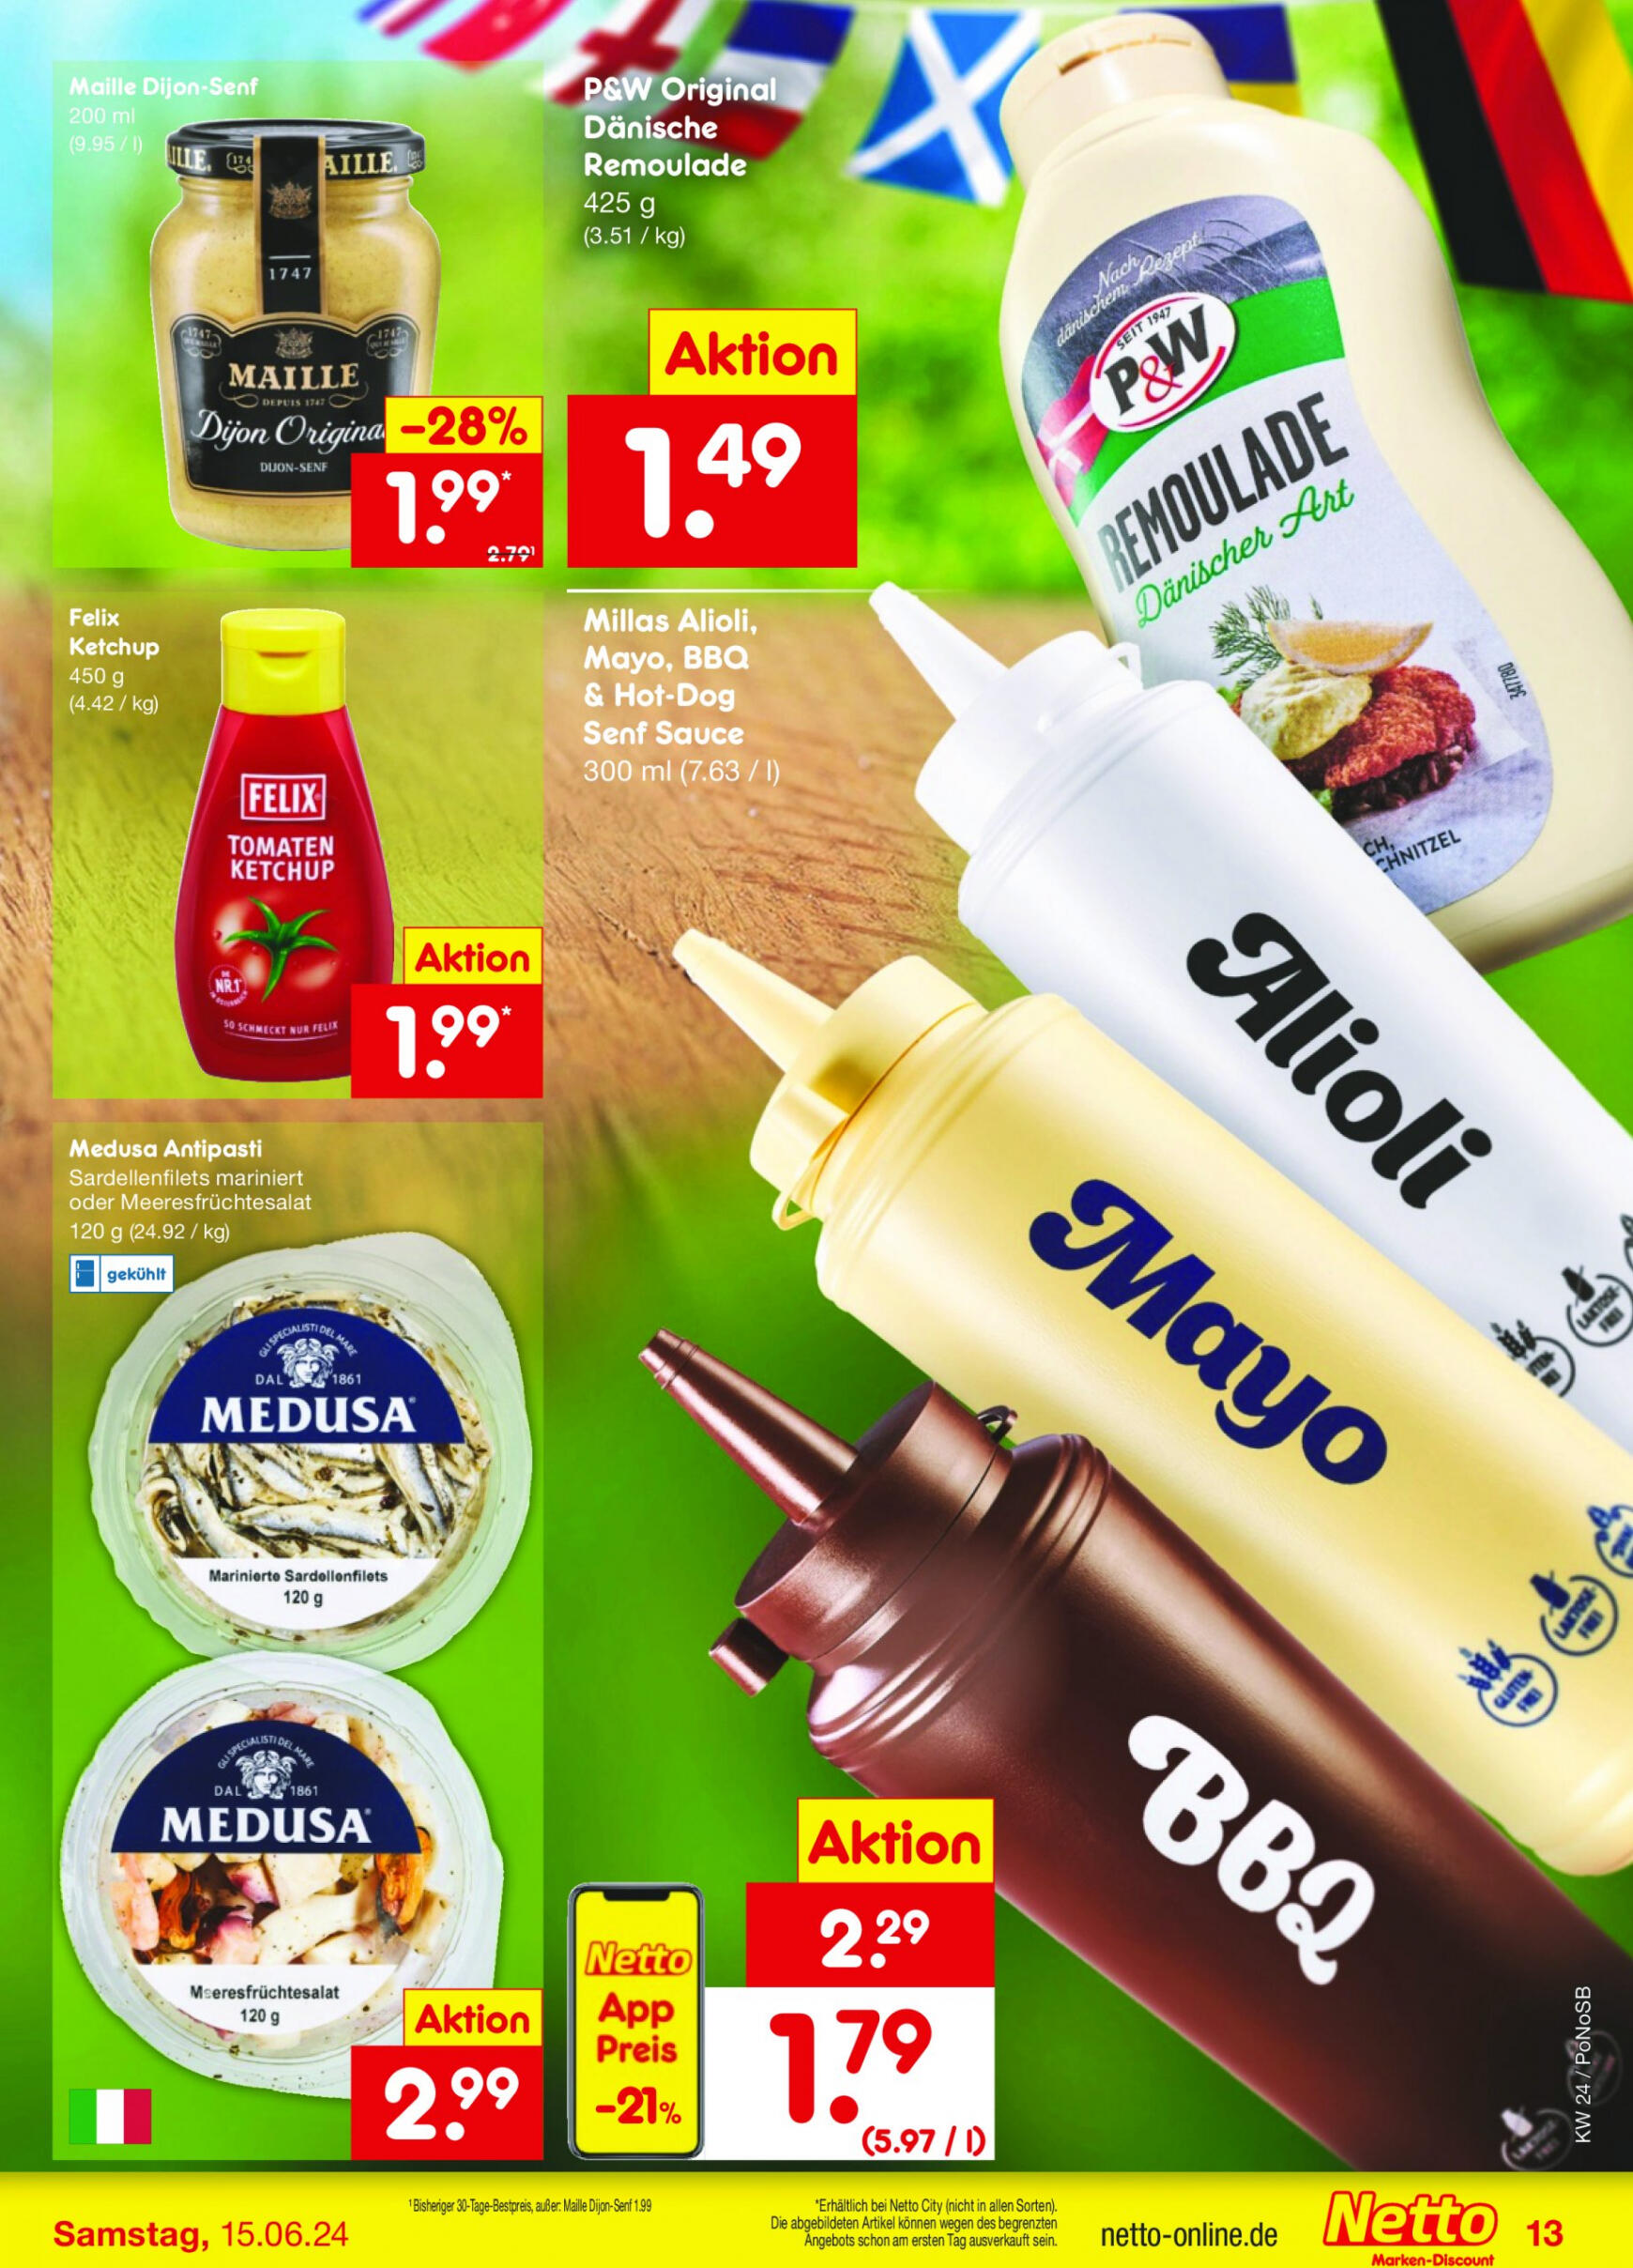 netto - Flyer Netto aktuell 10.06. - 15.06. - page: 15